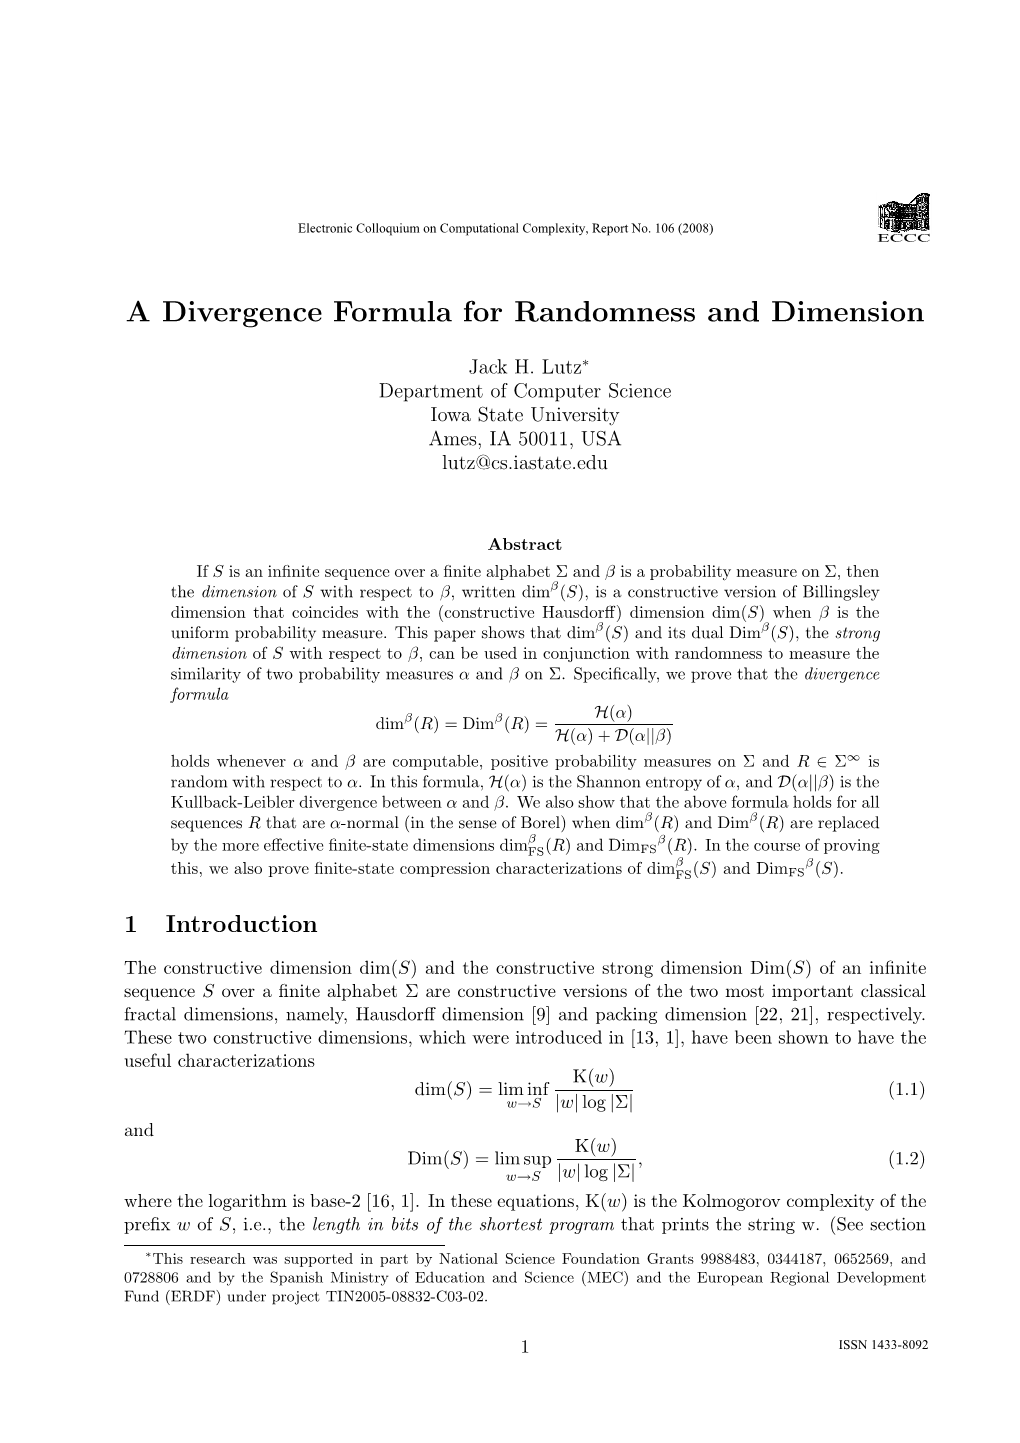 A Divergence Formula for Randomness and Dimension